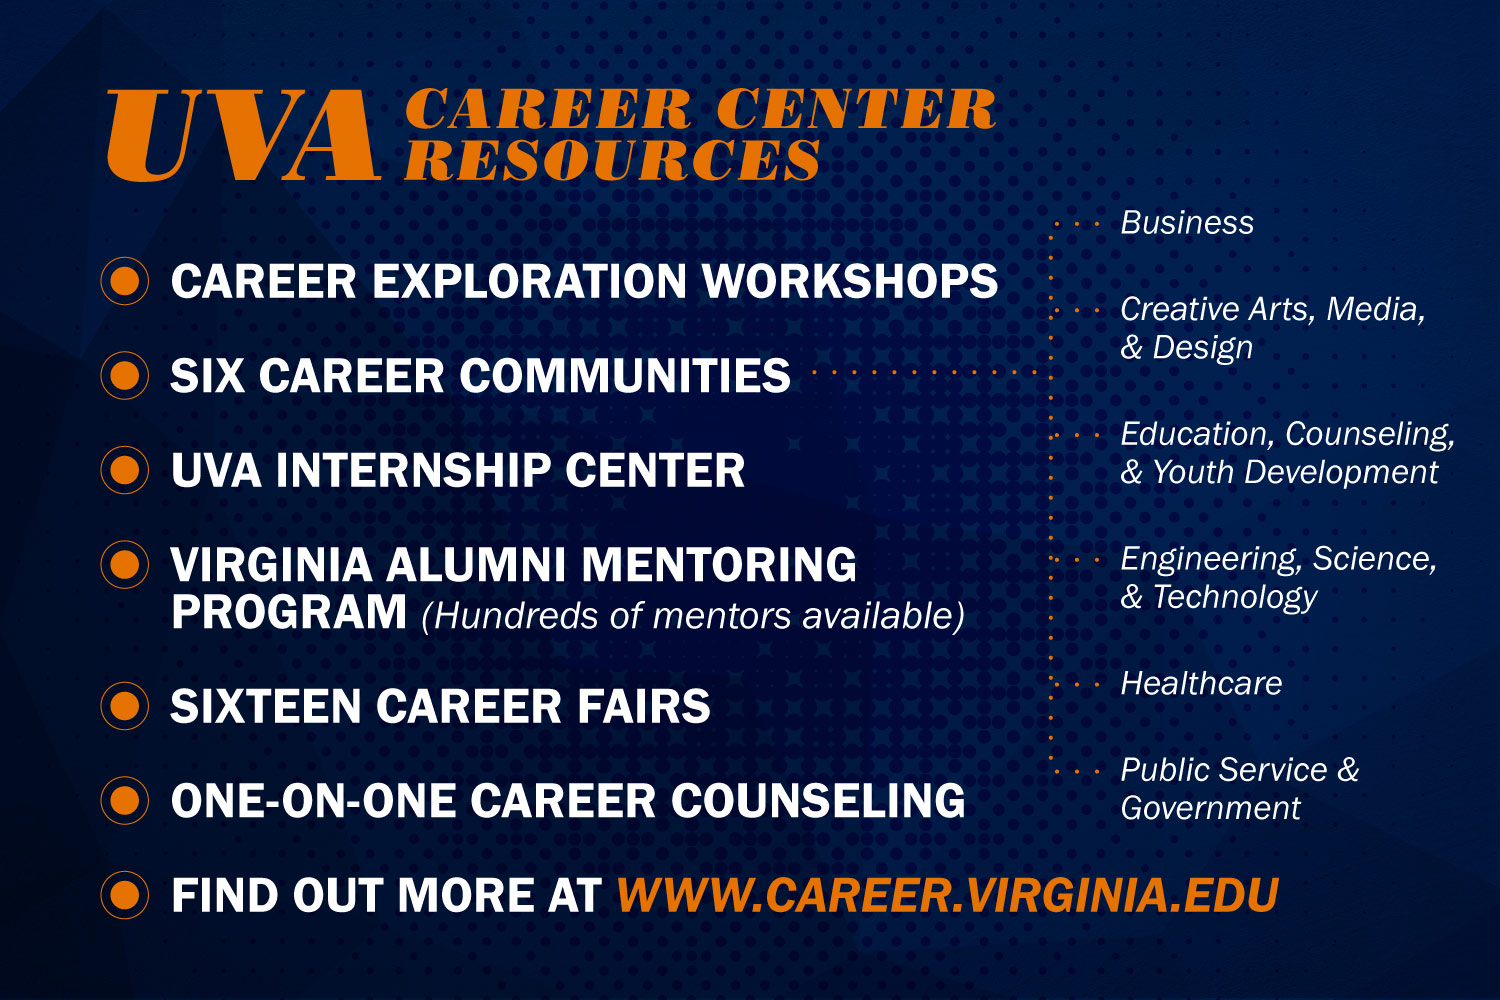 Text reads: UVA Career Center Resources: career exploration workshops, six career communities (business, creative arts, media & design, education, counseling, & Youth development, engineering, science, & Technology, Healthcare, public service & government), uva internship center, VA Alumni mentoring program (hundreds of mentors available), 16 career fairs, one-on-one career counseling, find out more at www dot career dot virginia dot edu